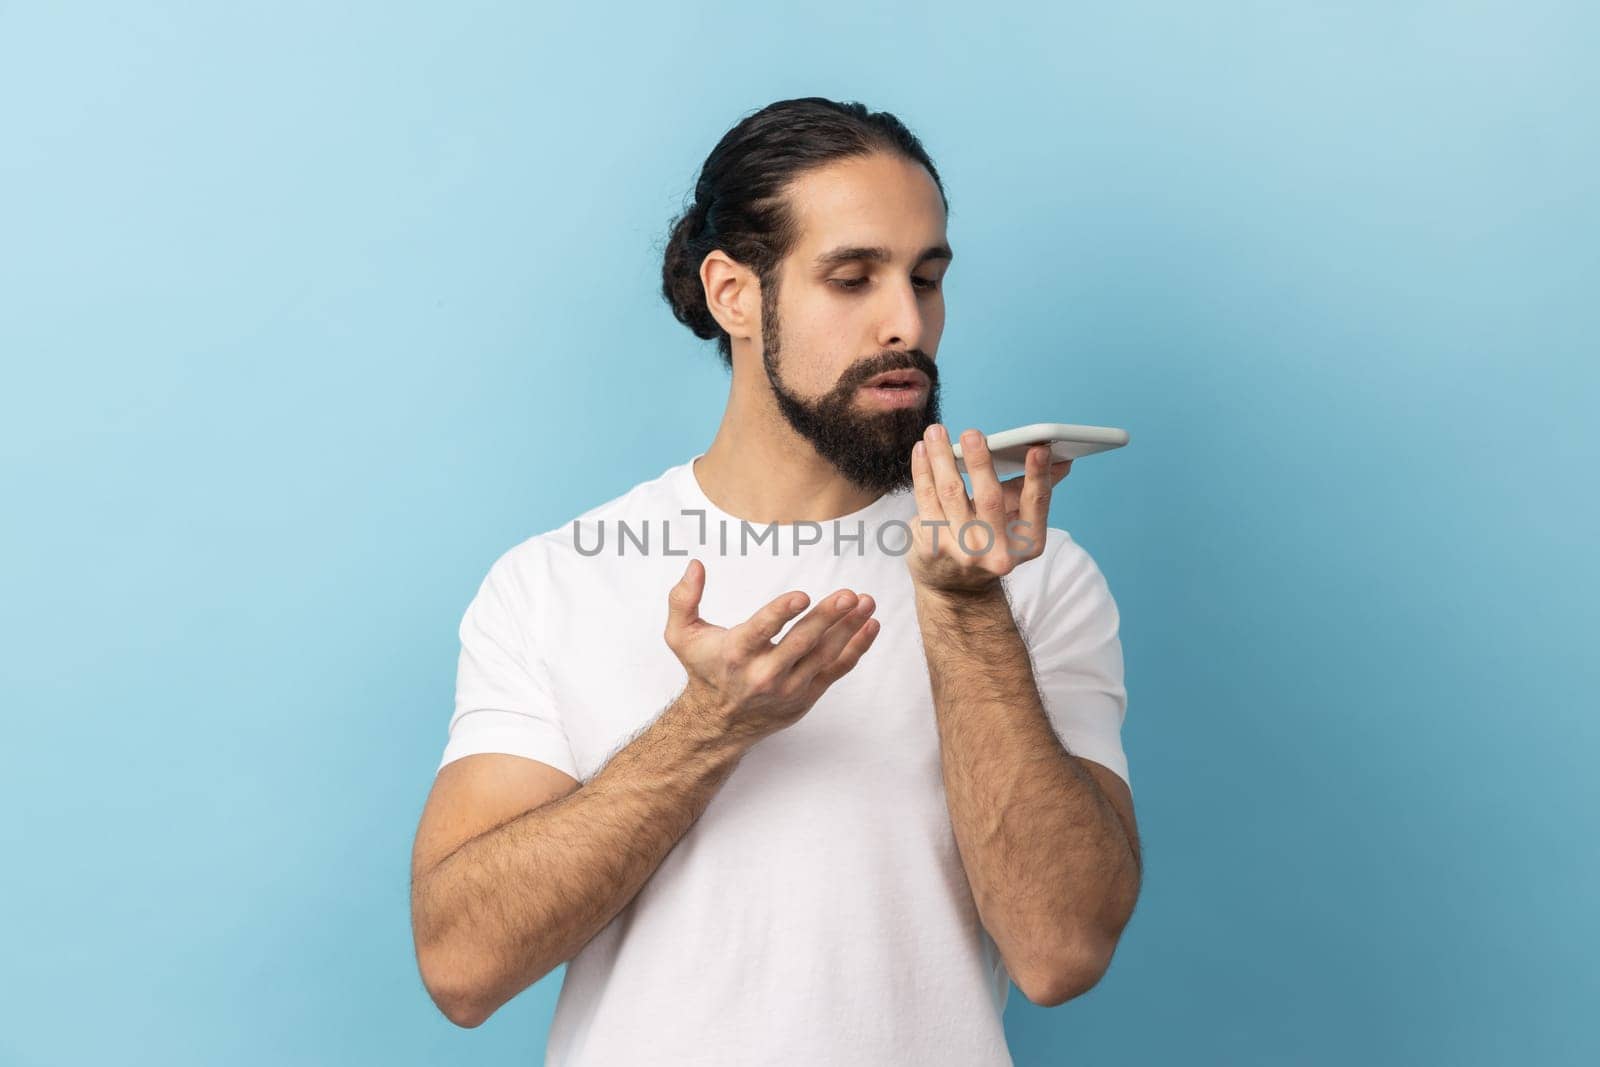 Smart voice technology. Portrait of man with beard wearing white T-shirt talking to cell phone using virtual assistant, digital speaker application. Indoor studio shot isolated on blue background.